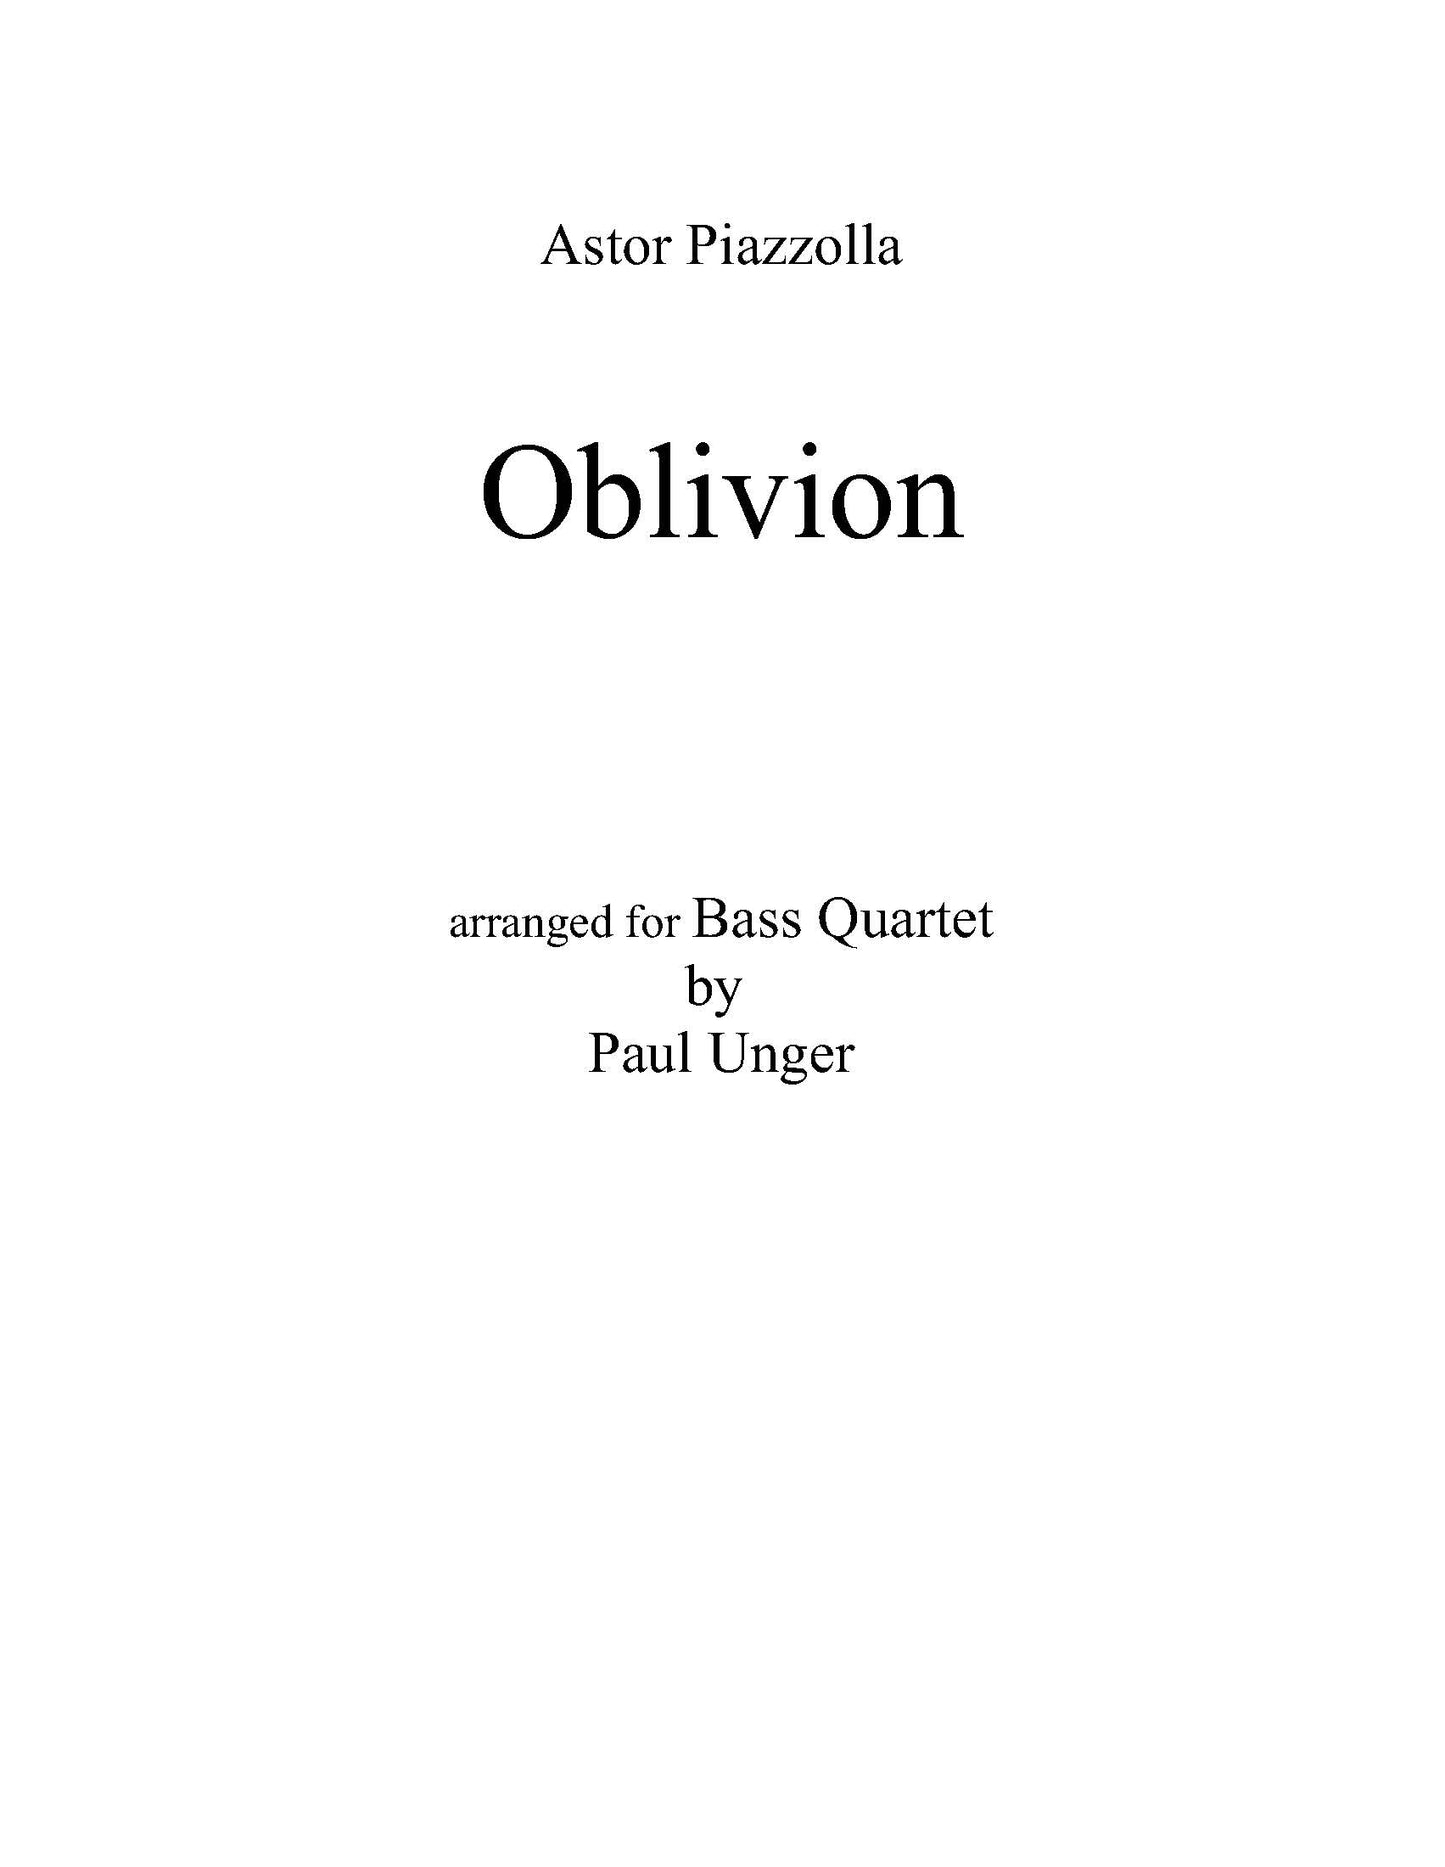 Piazzolla: Oblivion Arranged by Paul Unger for Bass Quartet (PDF Score and Parts)